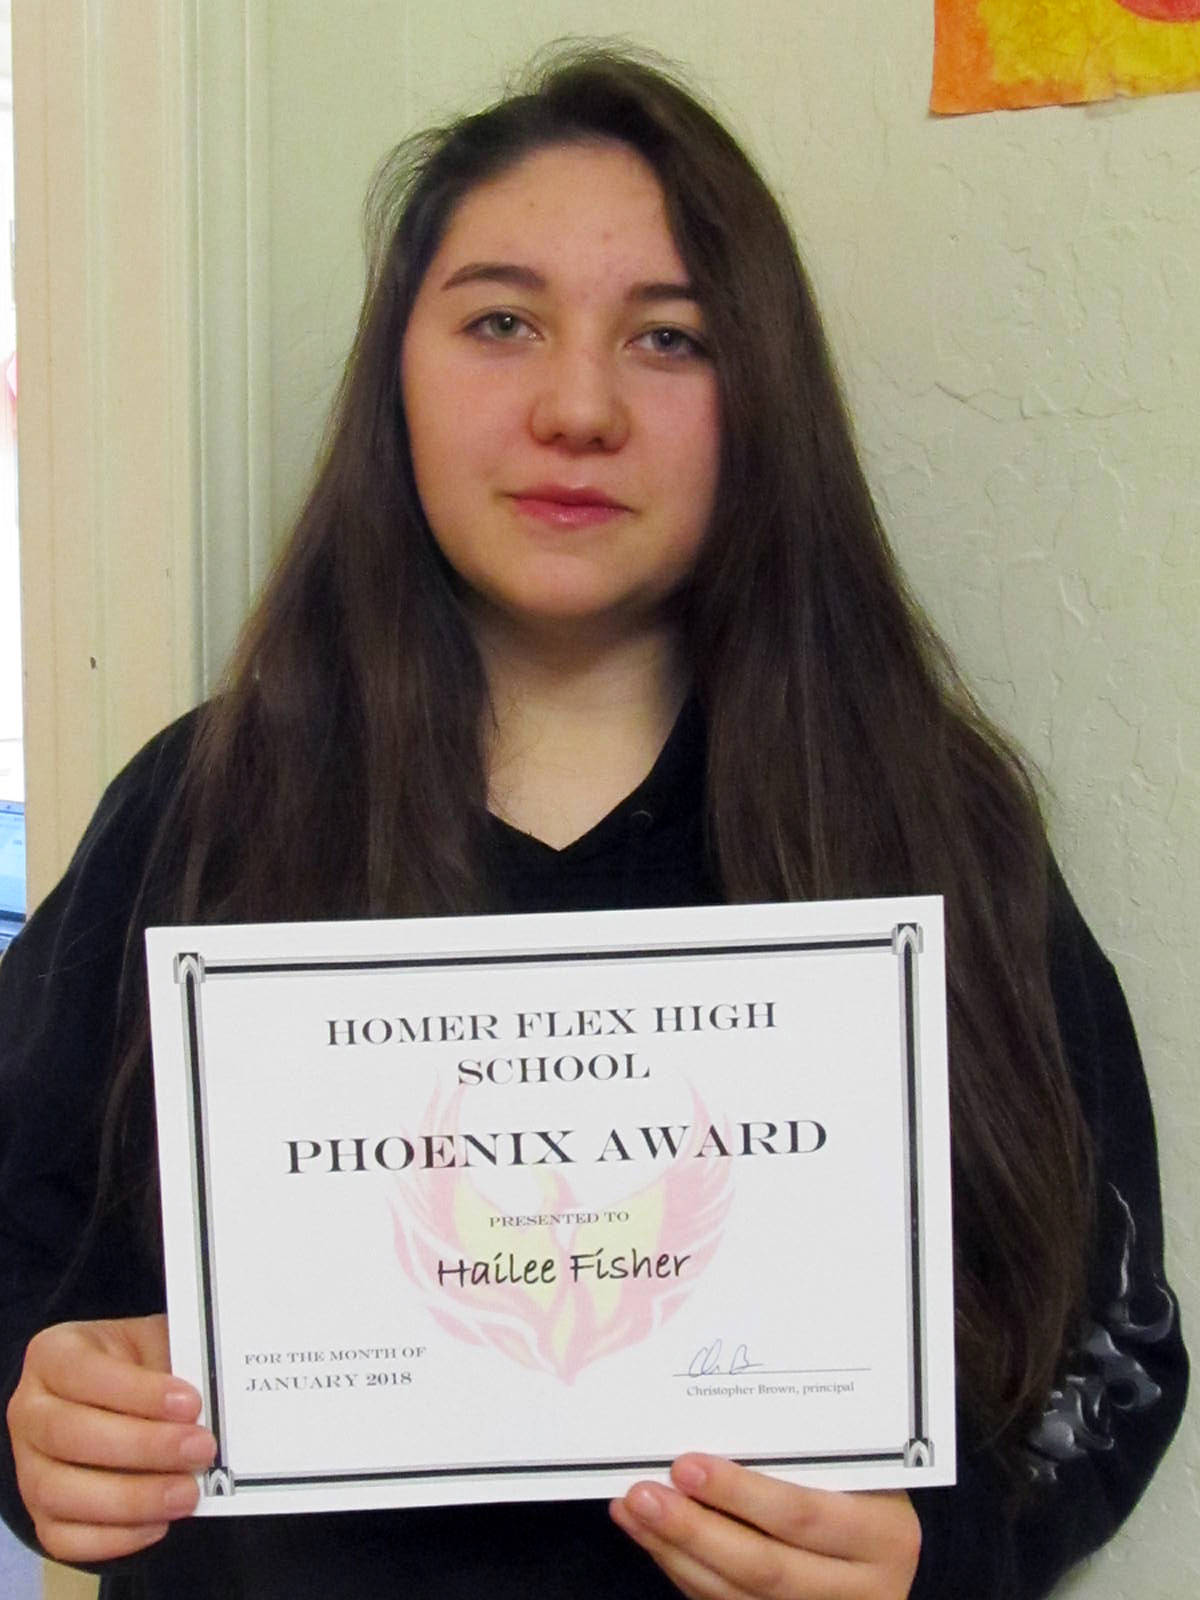 Hailee Fisher, shown here, is the recipient of this month’s Phoenix Award from Homer Flex High School. (Photo submitted)